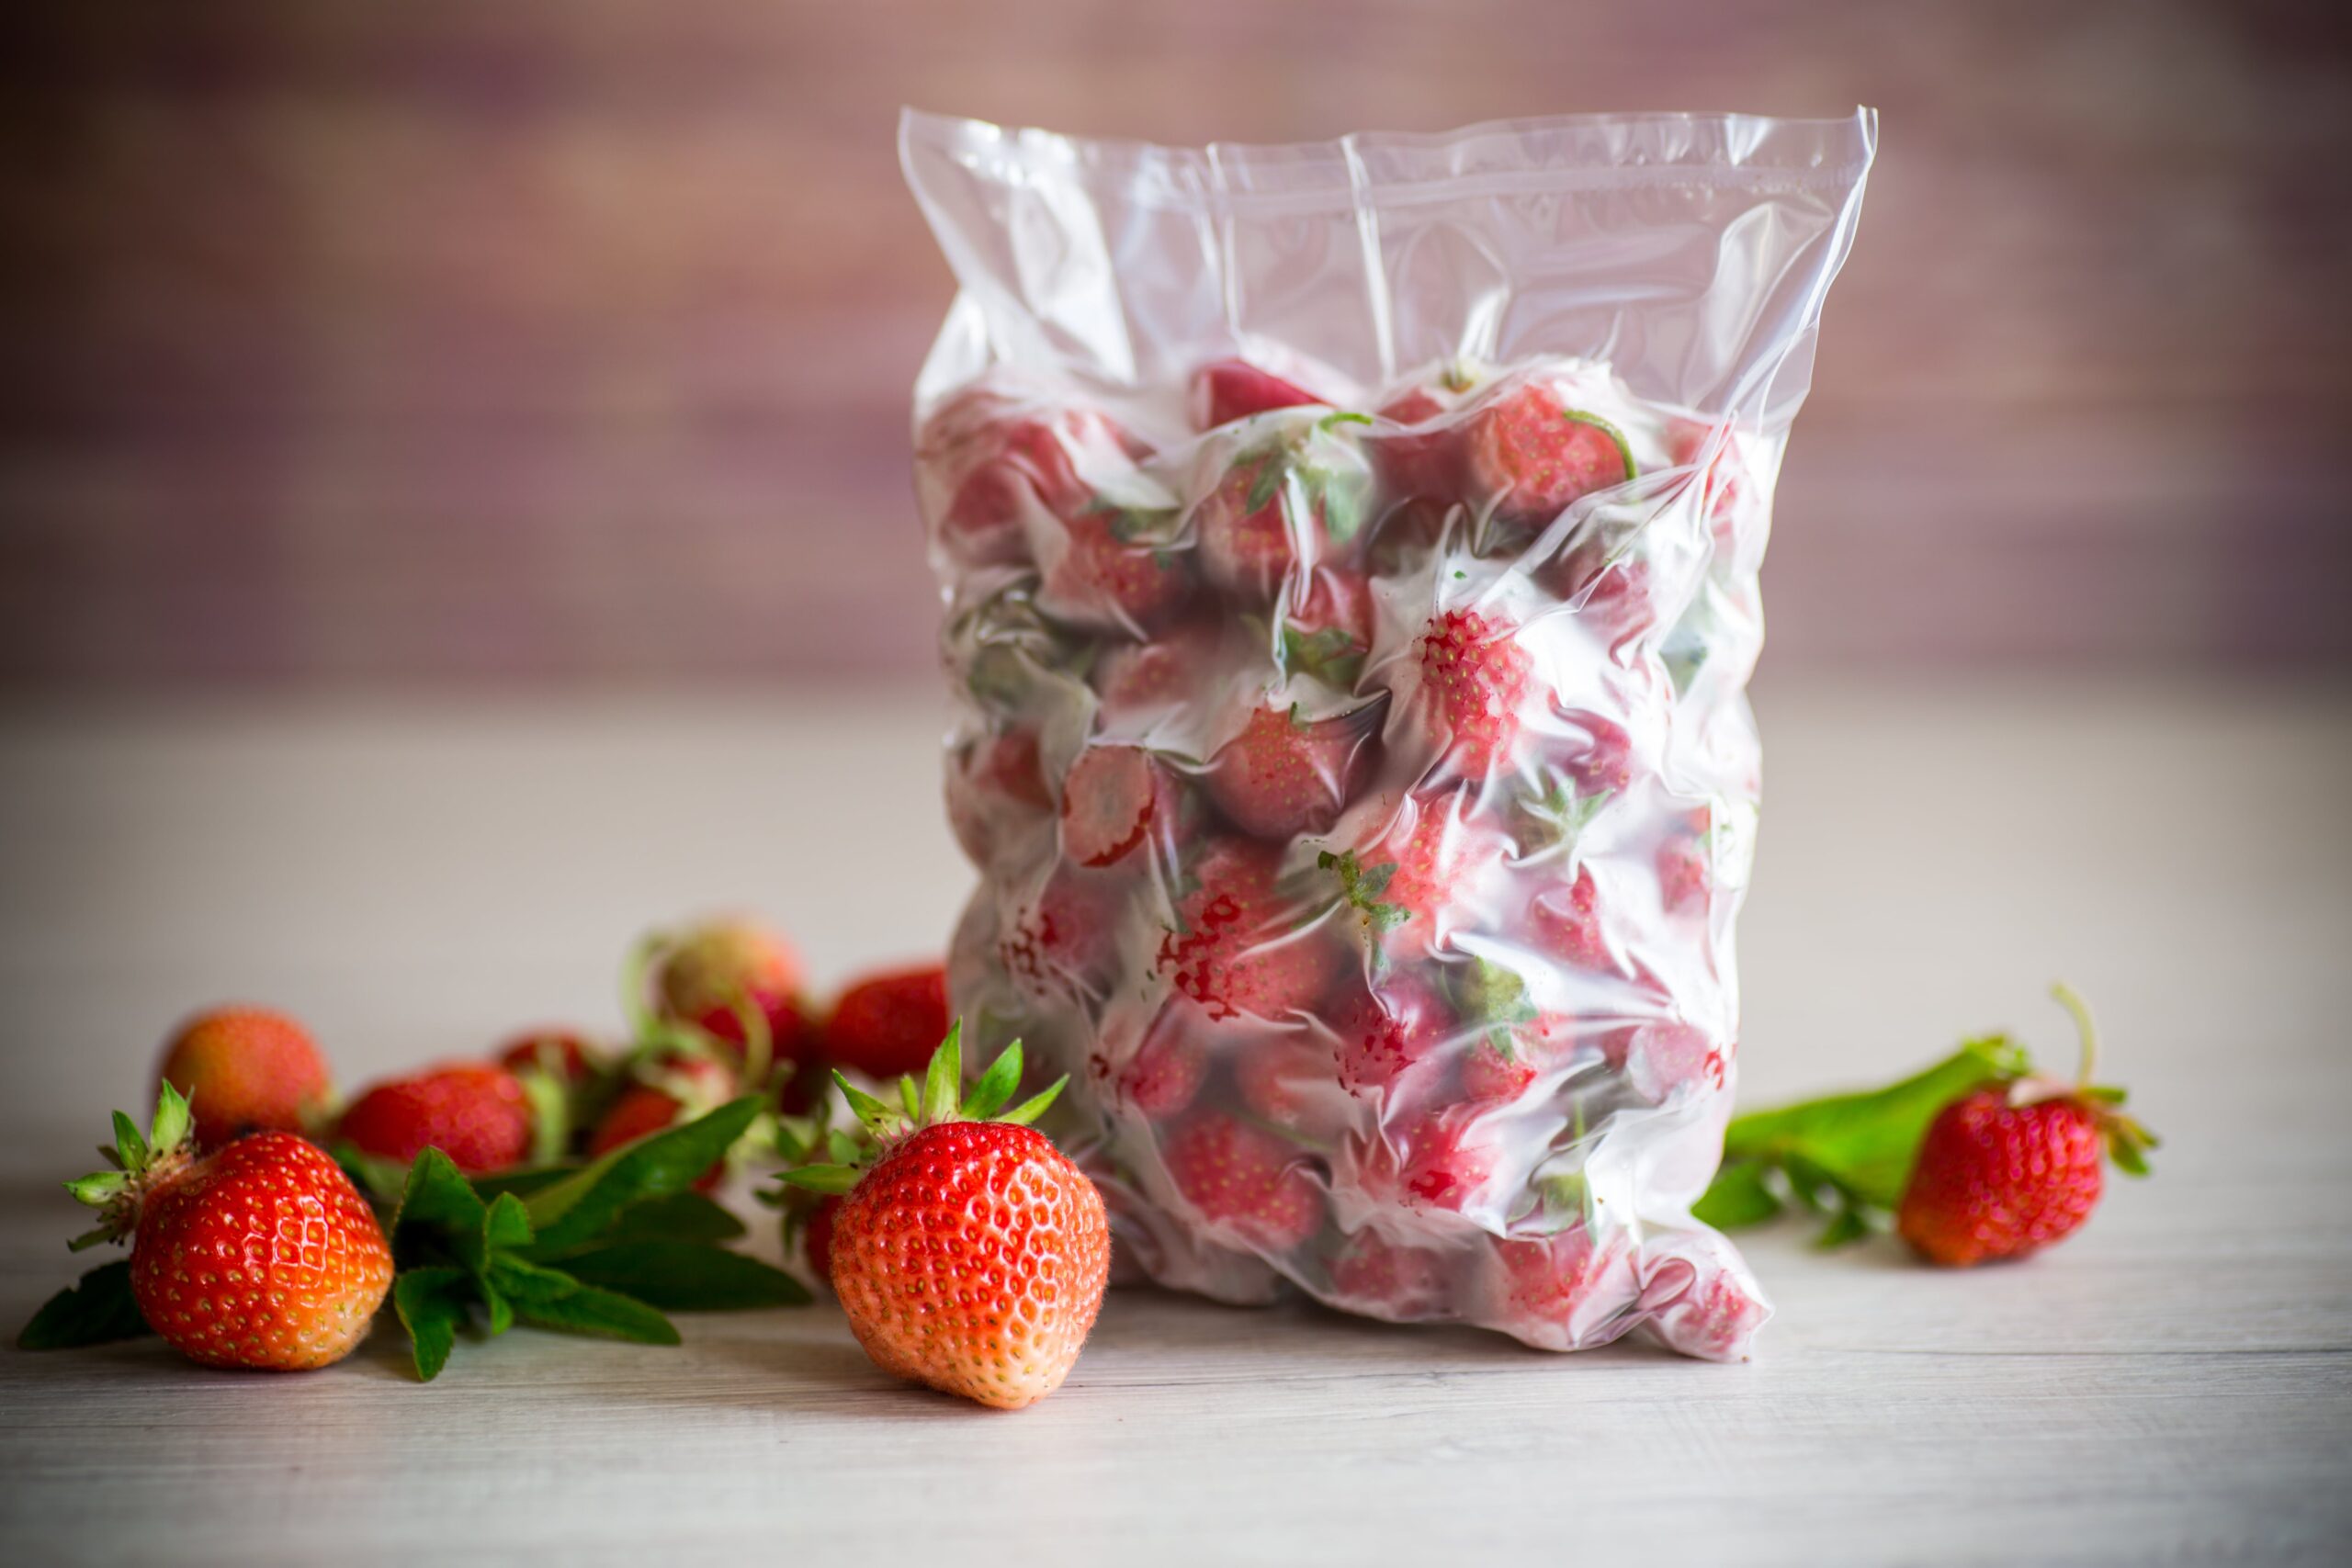 Key features of PolyExpert frozen food packaging like cold resistance and moisture barrier